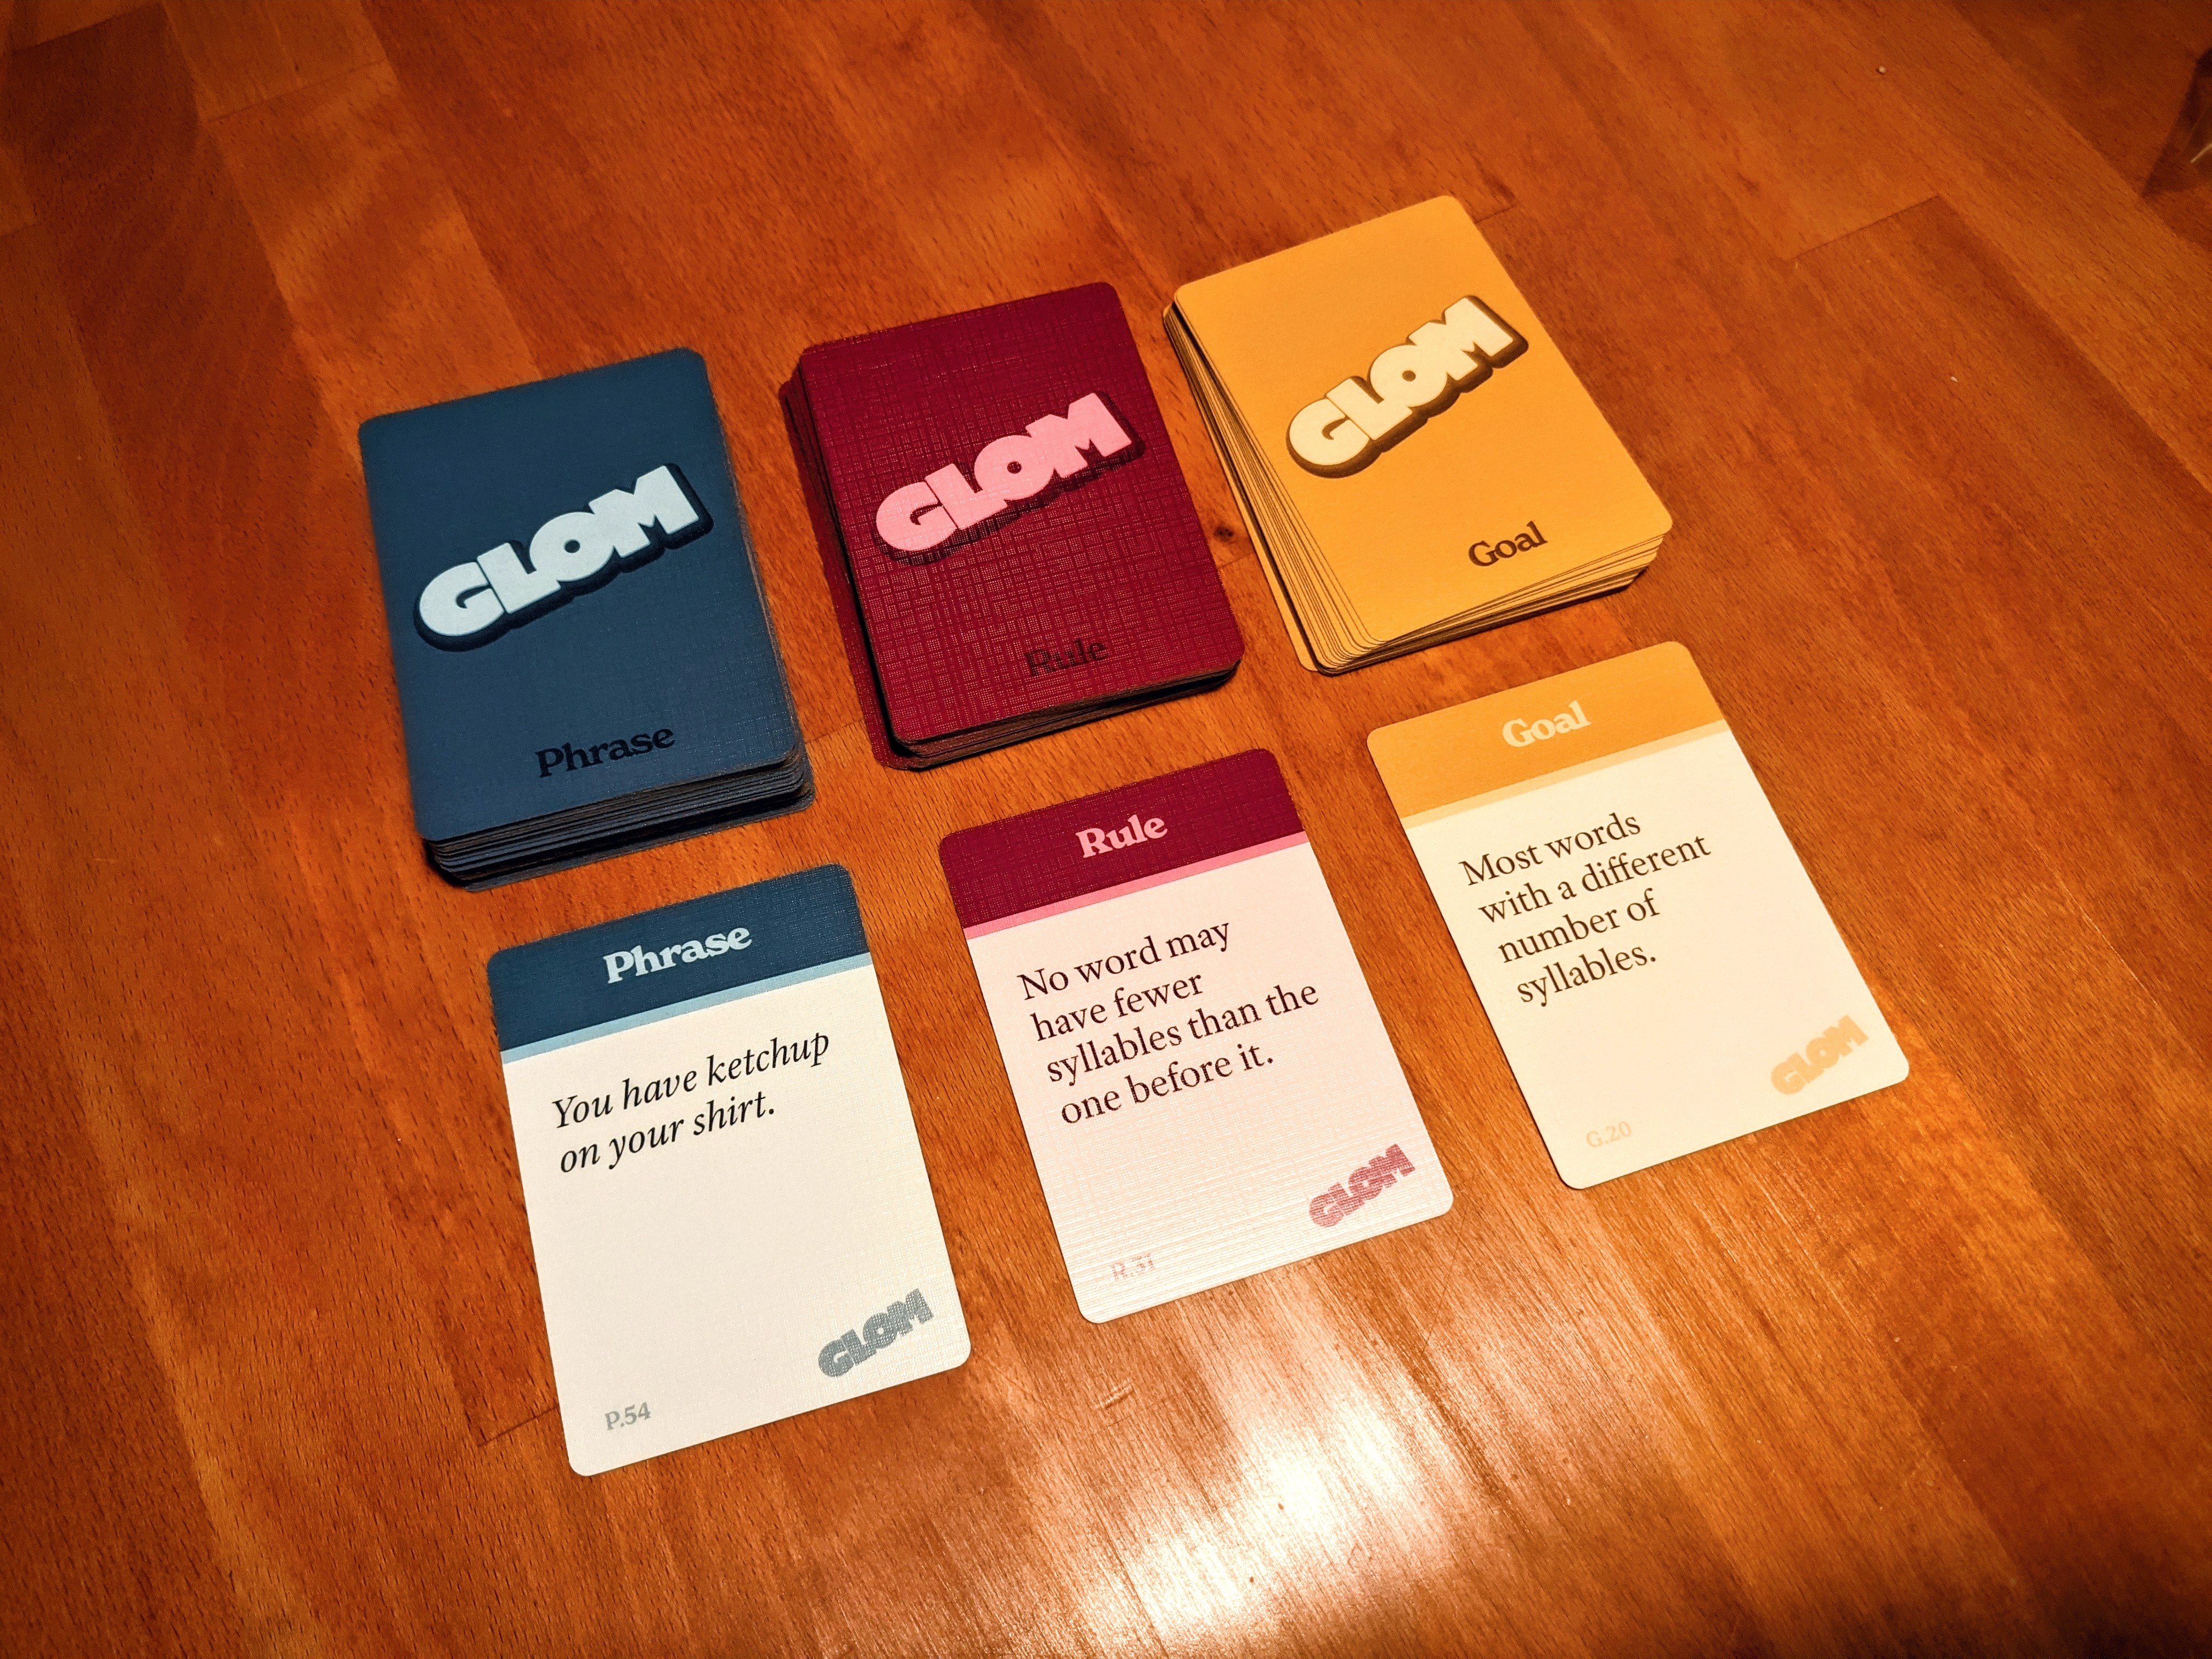 A photo showing the three card decks that make up Glom.